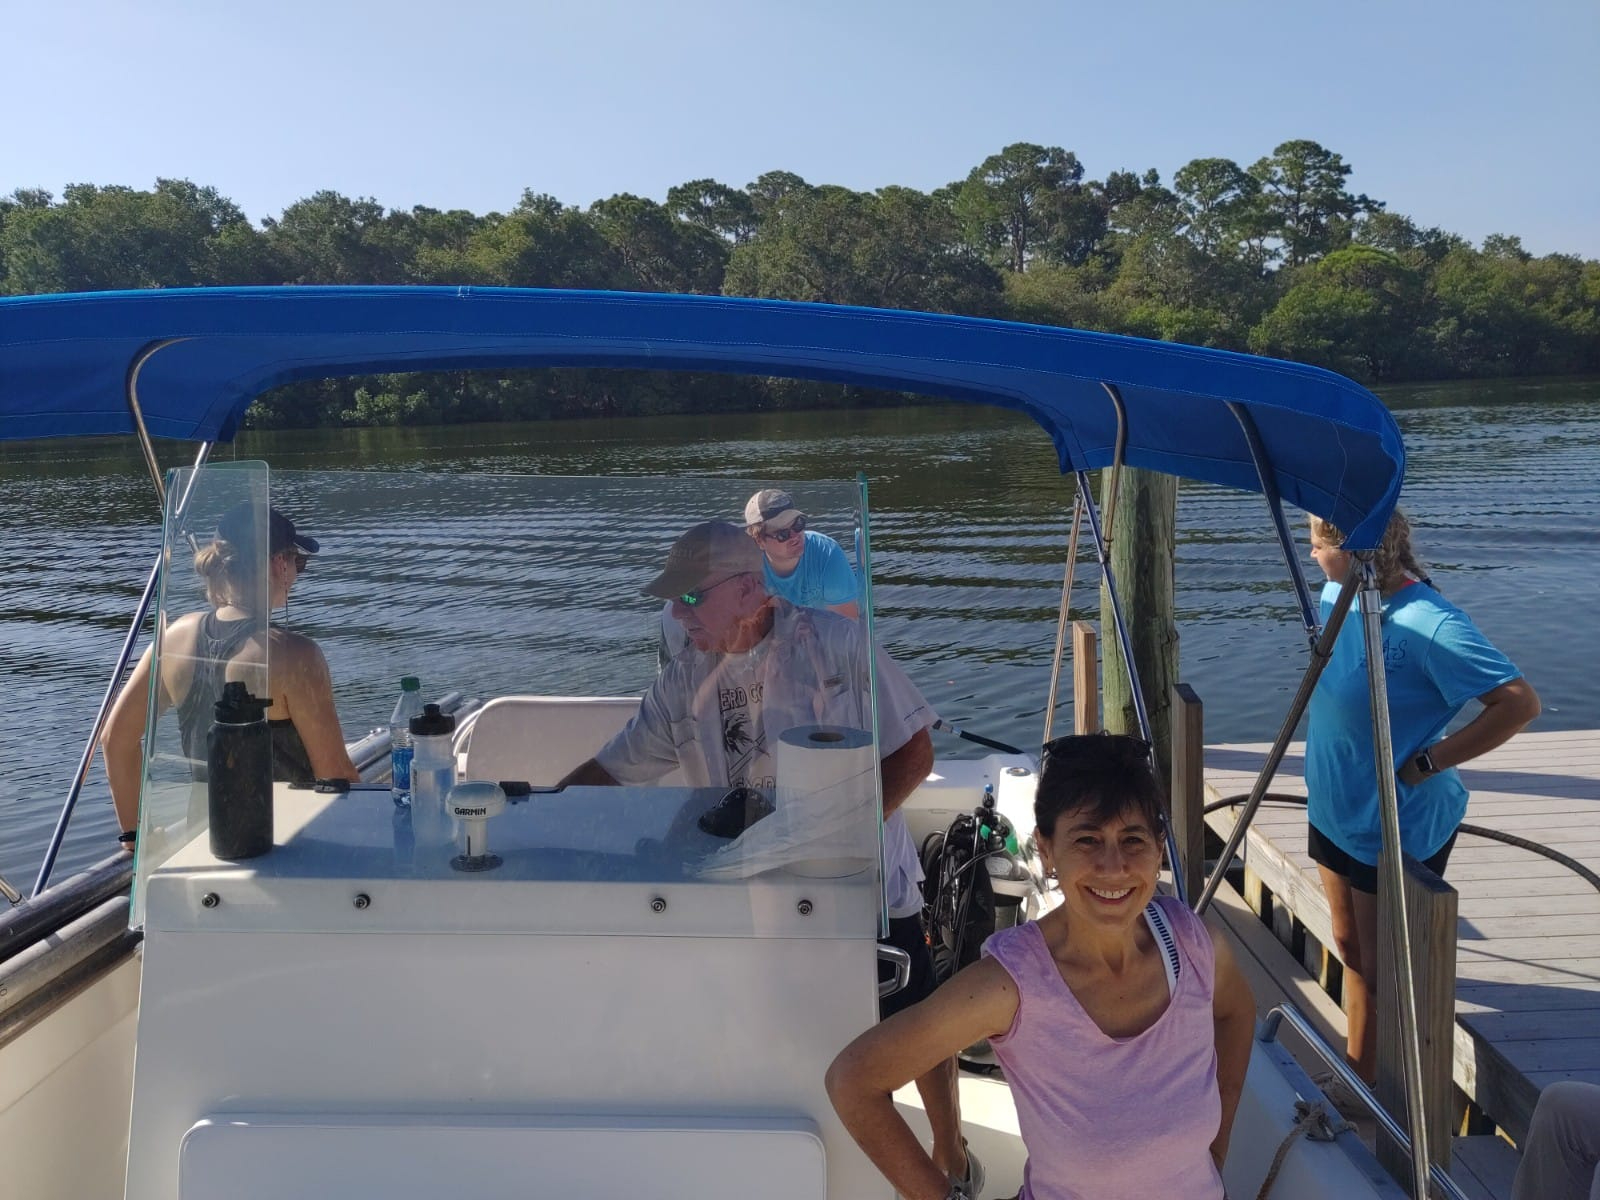 Loading the boat for our first day on the water (from left to right: Sanne Haima, dr. Gregg Brooks, Vince Shonka, dr. Francesca Sangiorgi and Jodi)